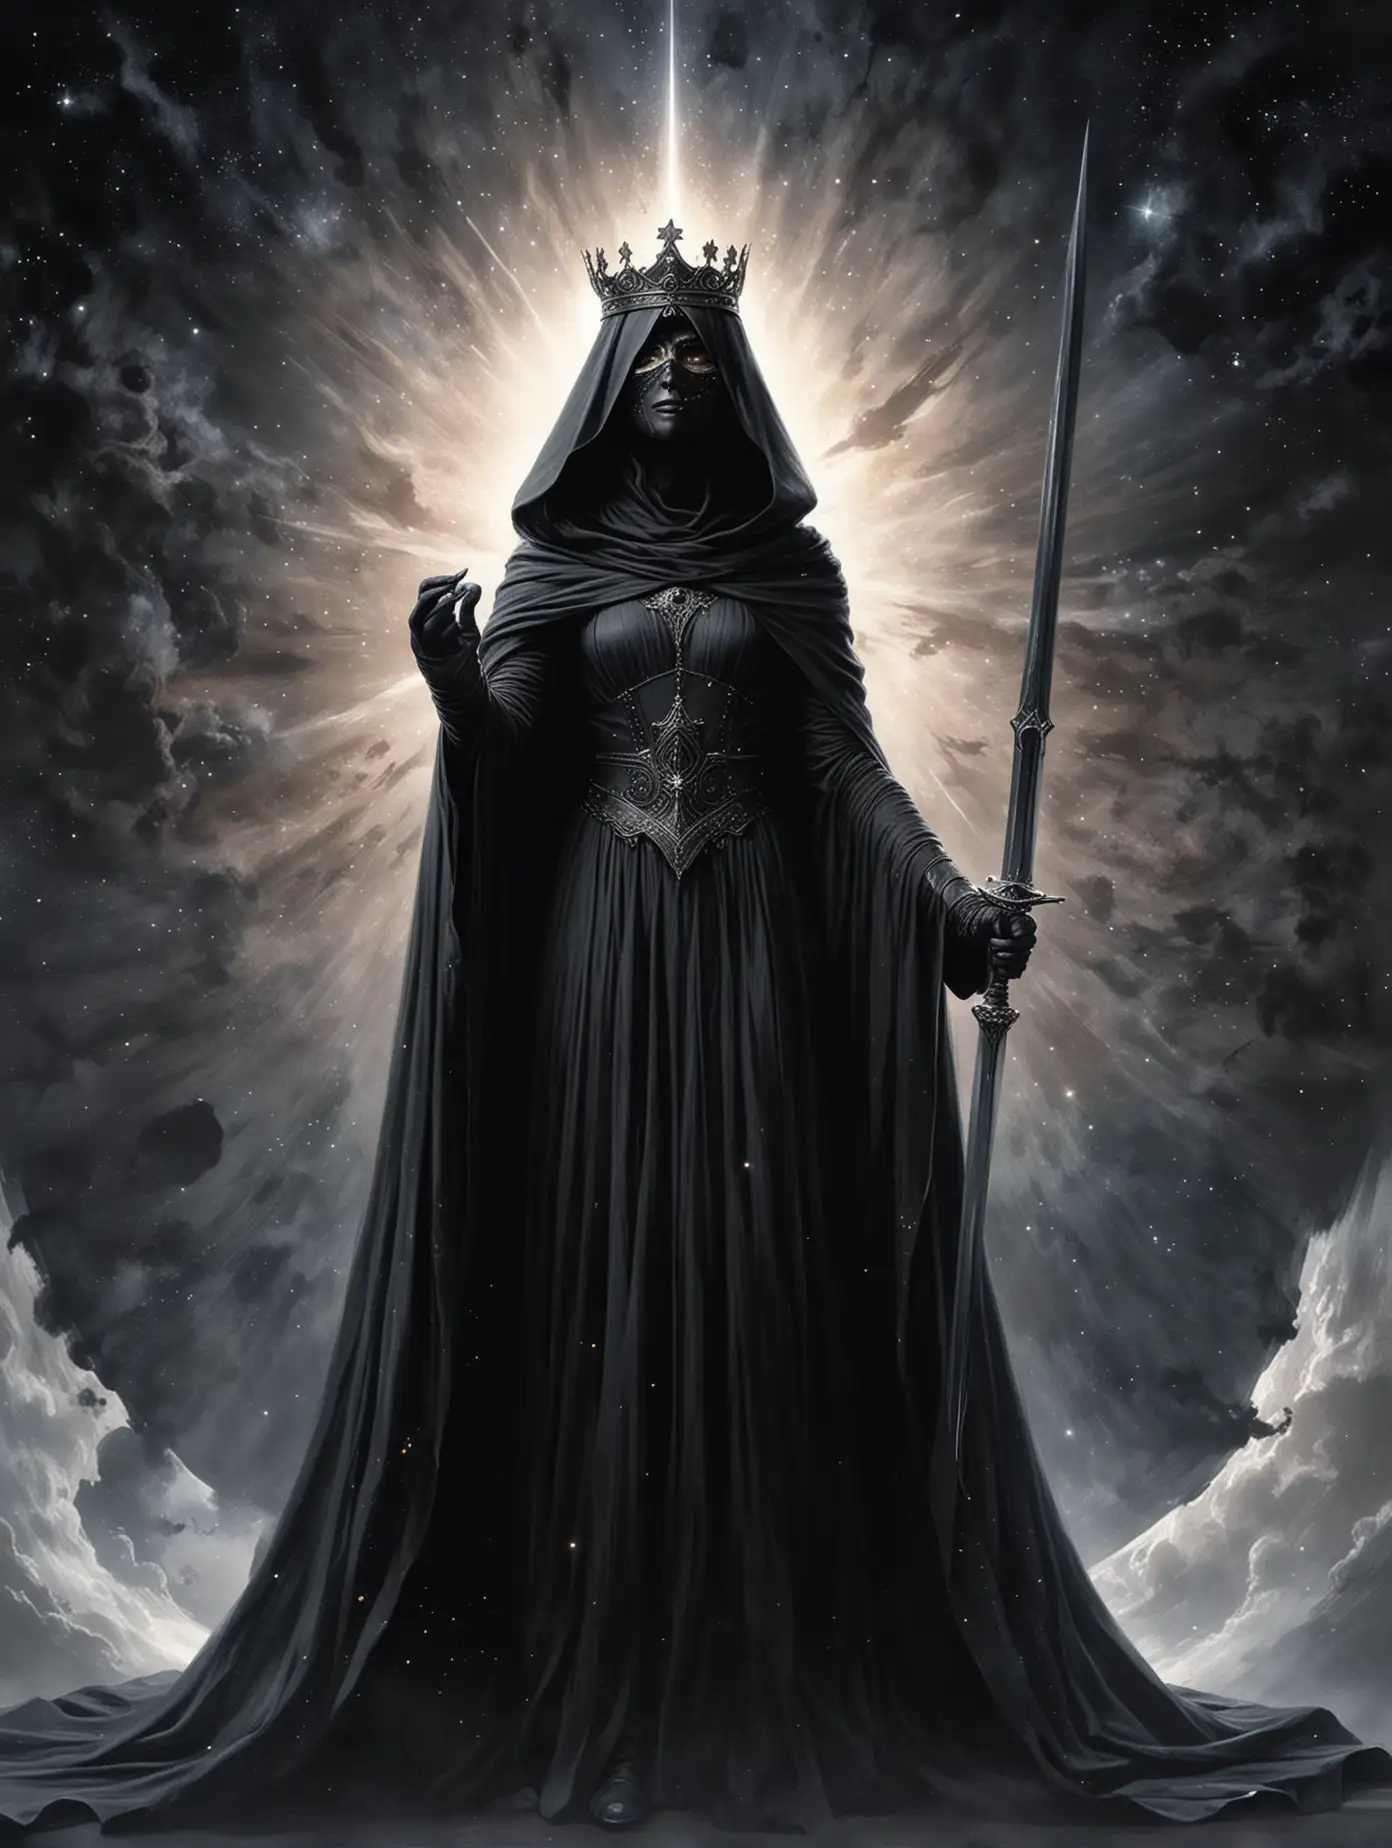 Sister-Geserit-Stands-at-the-Edge-of-a-Black-Hole-Wielding-a-Black-Sword